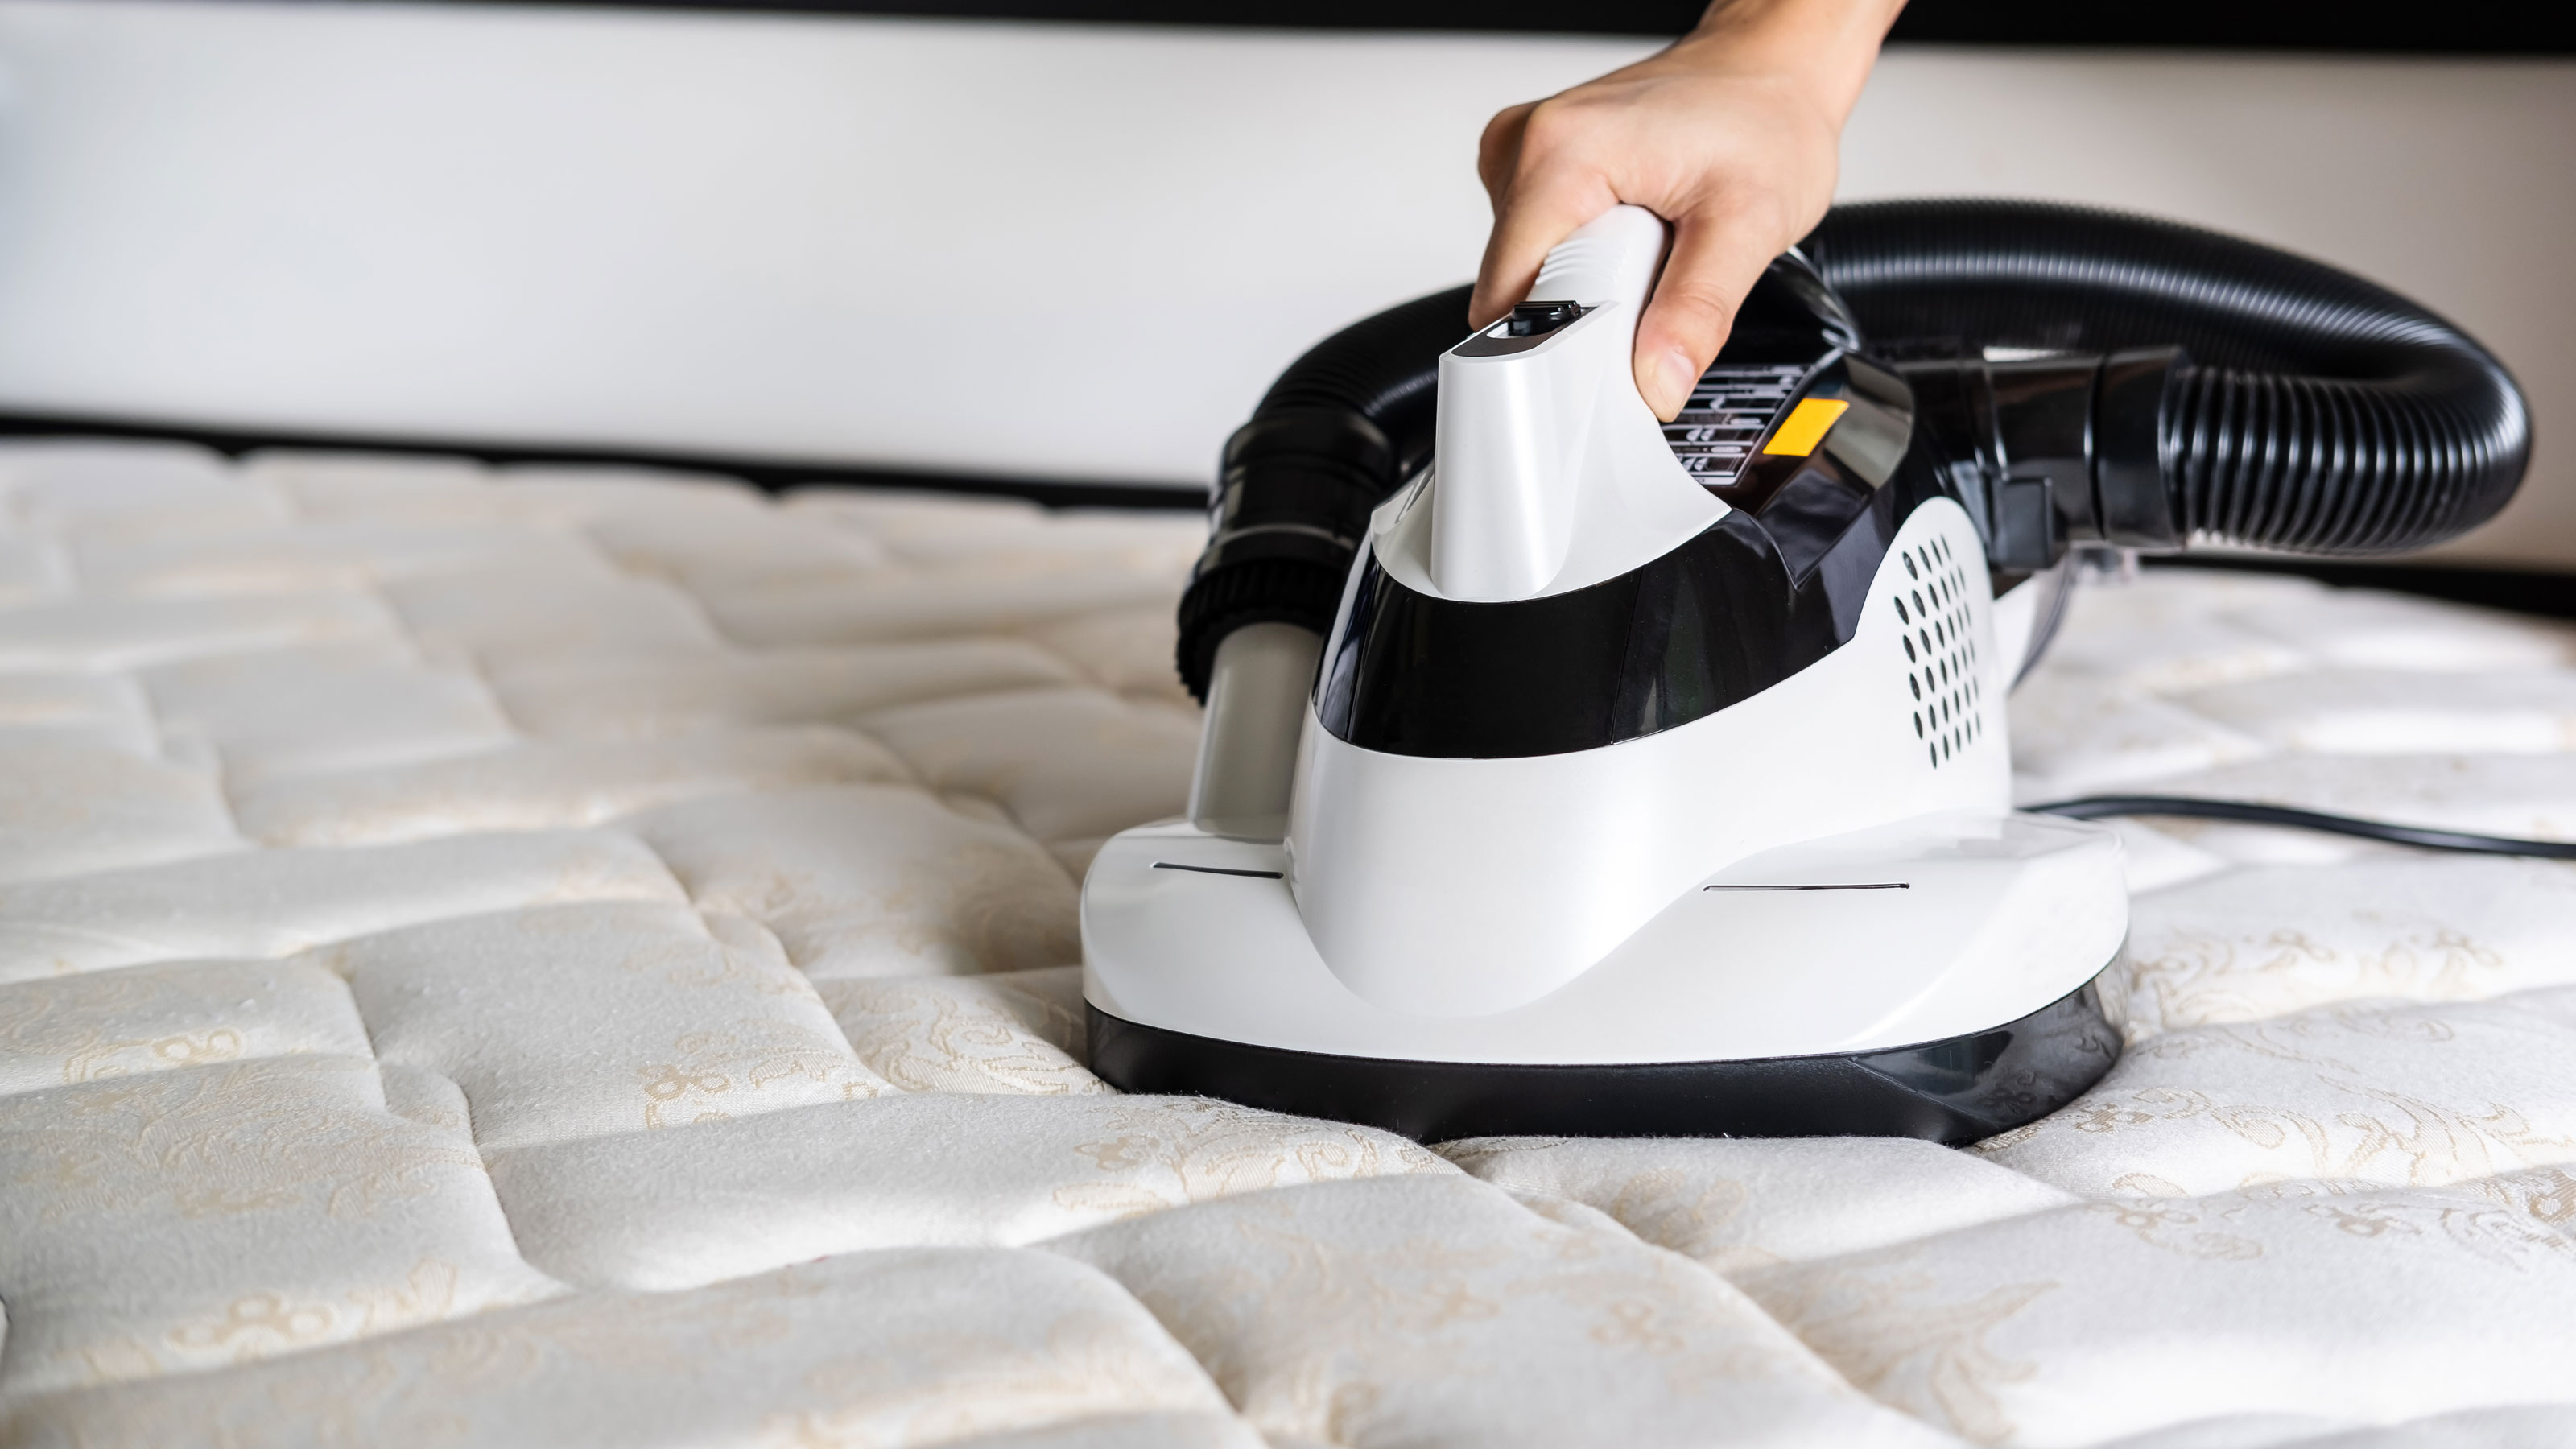 STAIN MATTRESS? Carpet Extractor DEEP CLEANING 